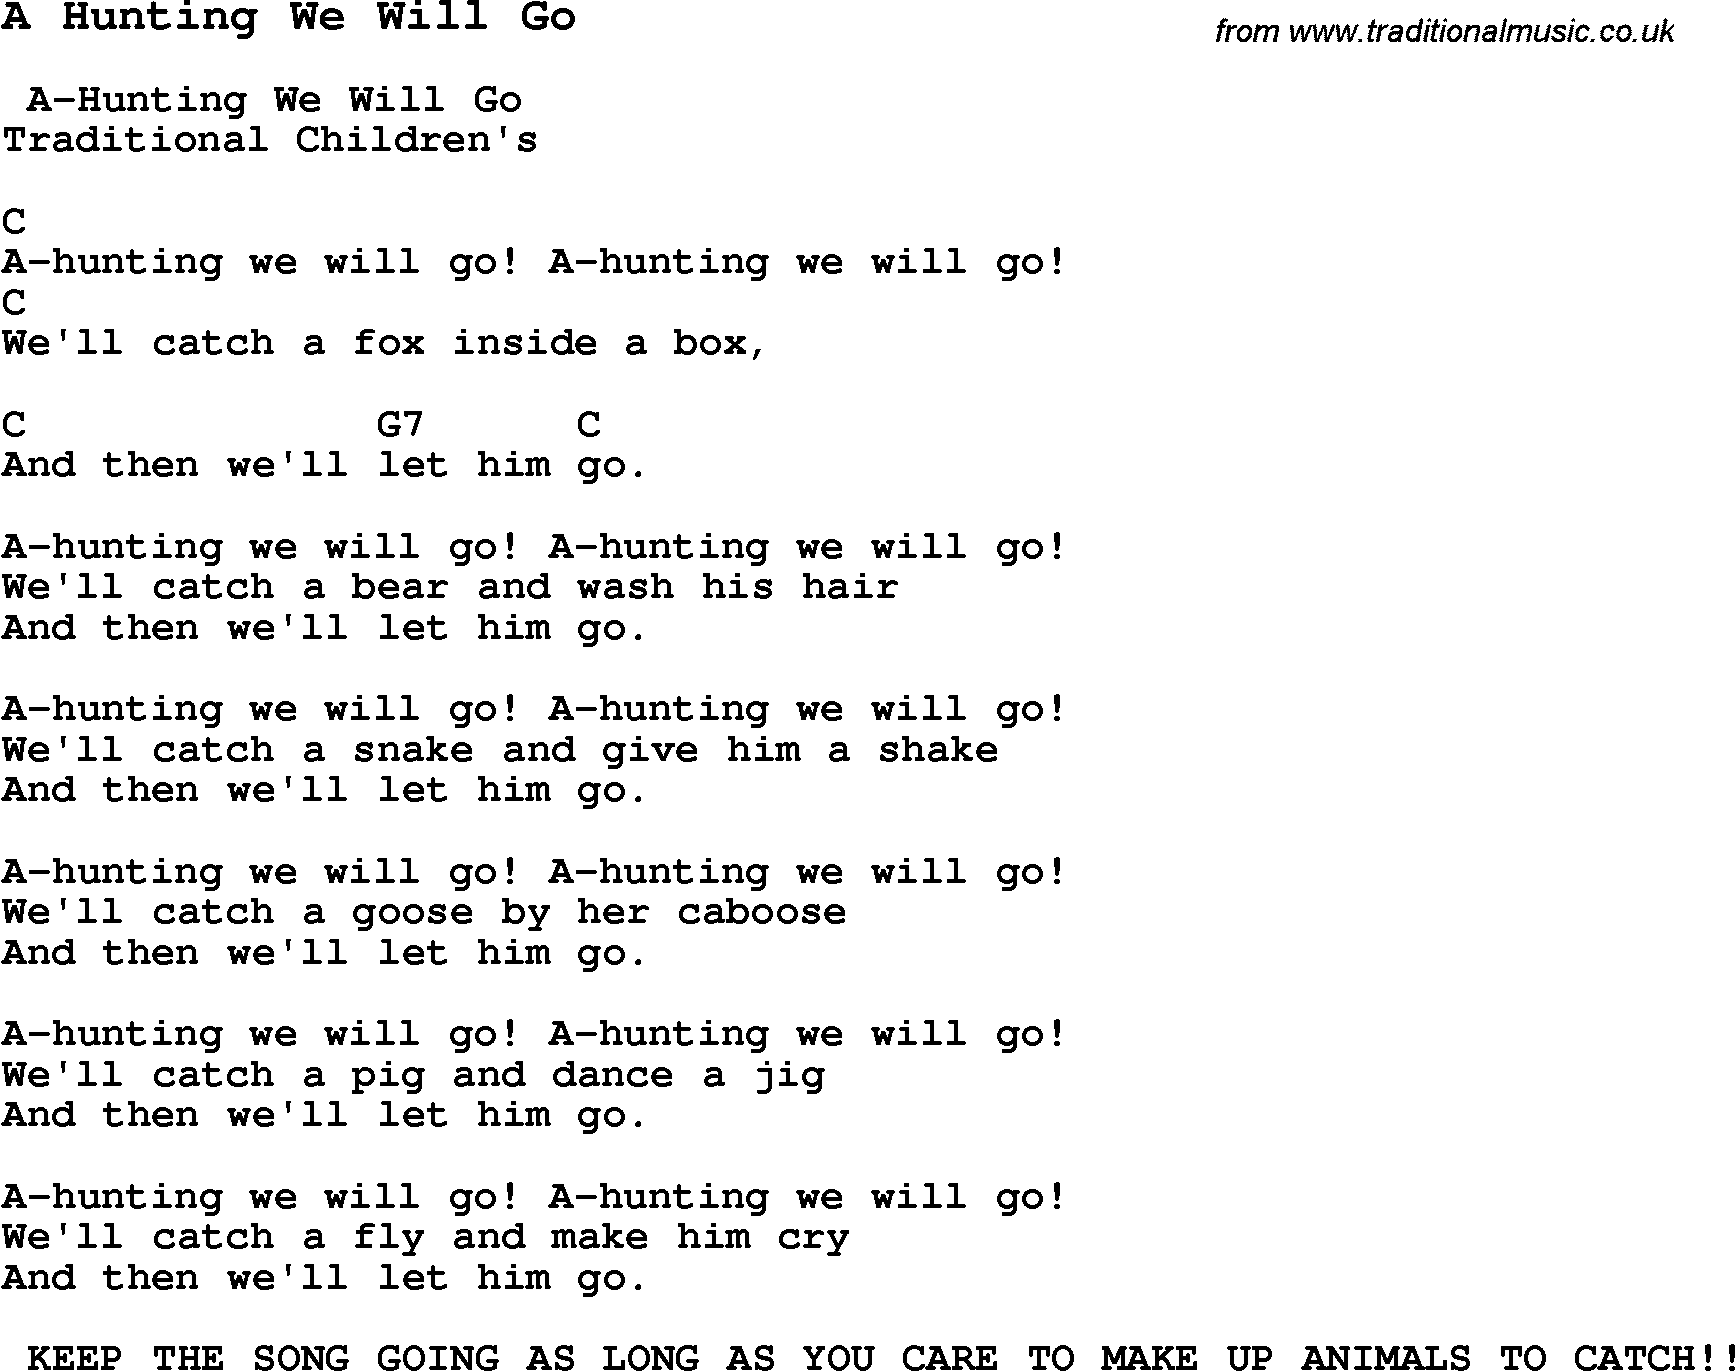 Summer-Camp Song, A Hunting We Will Go, with lyrics and chords for Ukulele, Guitar Banjo etc.